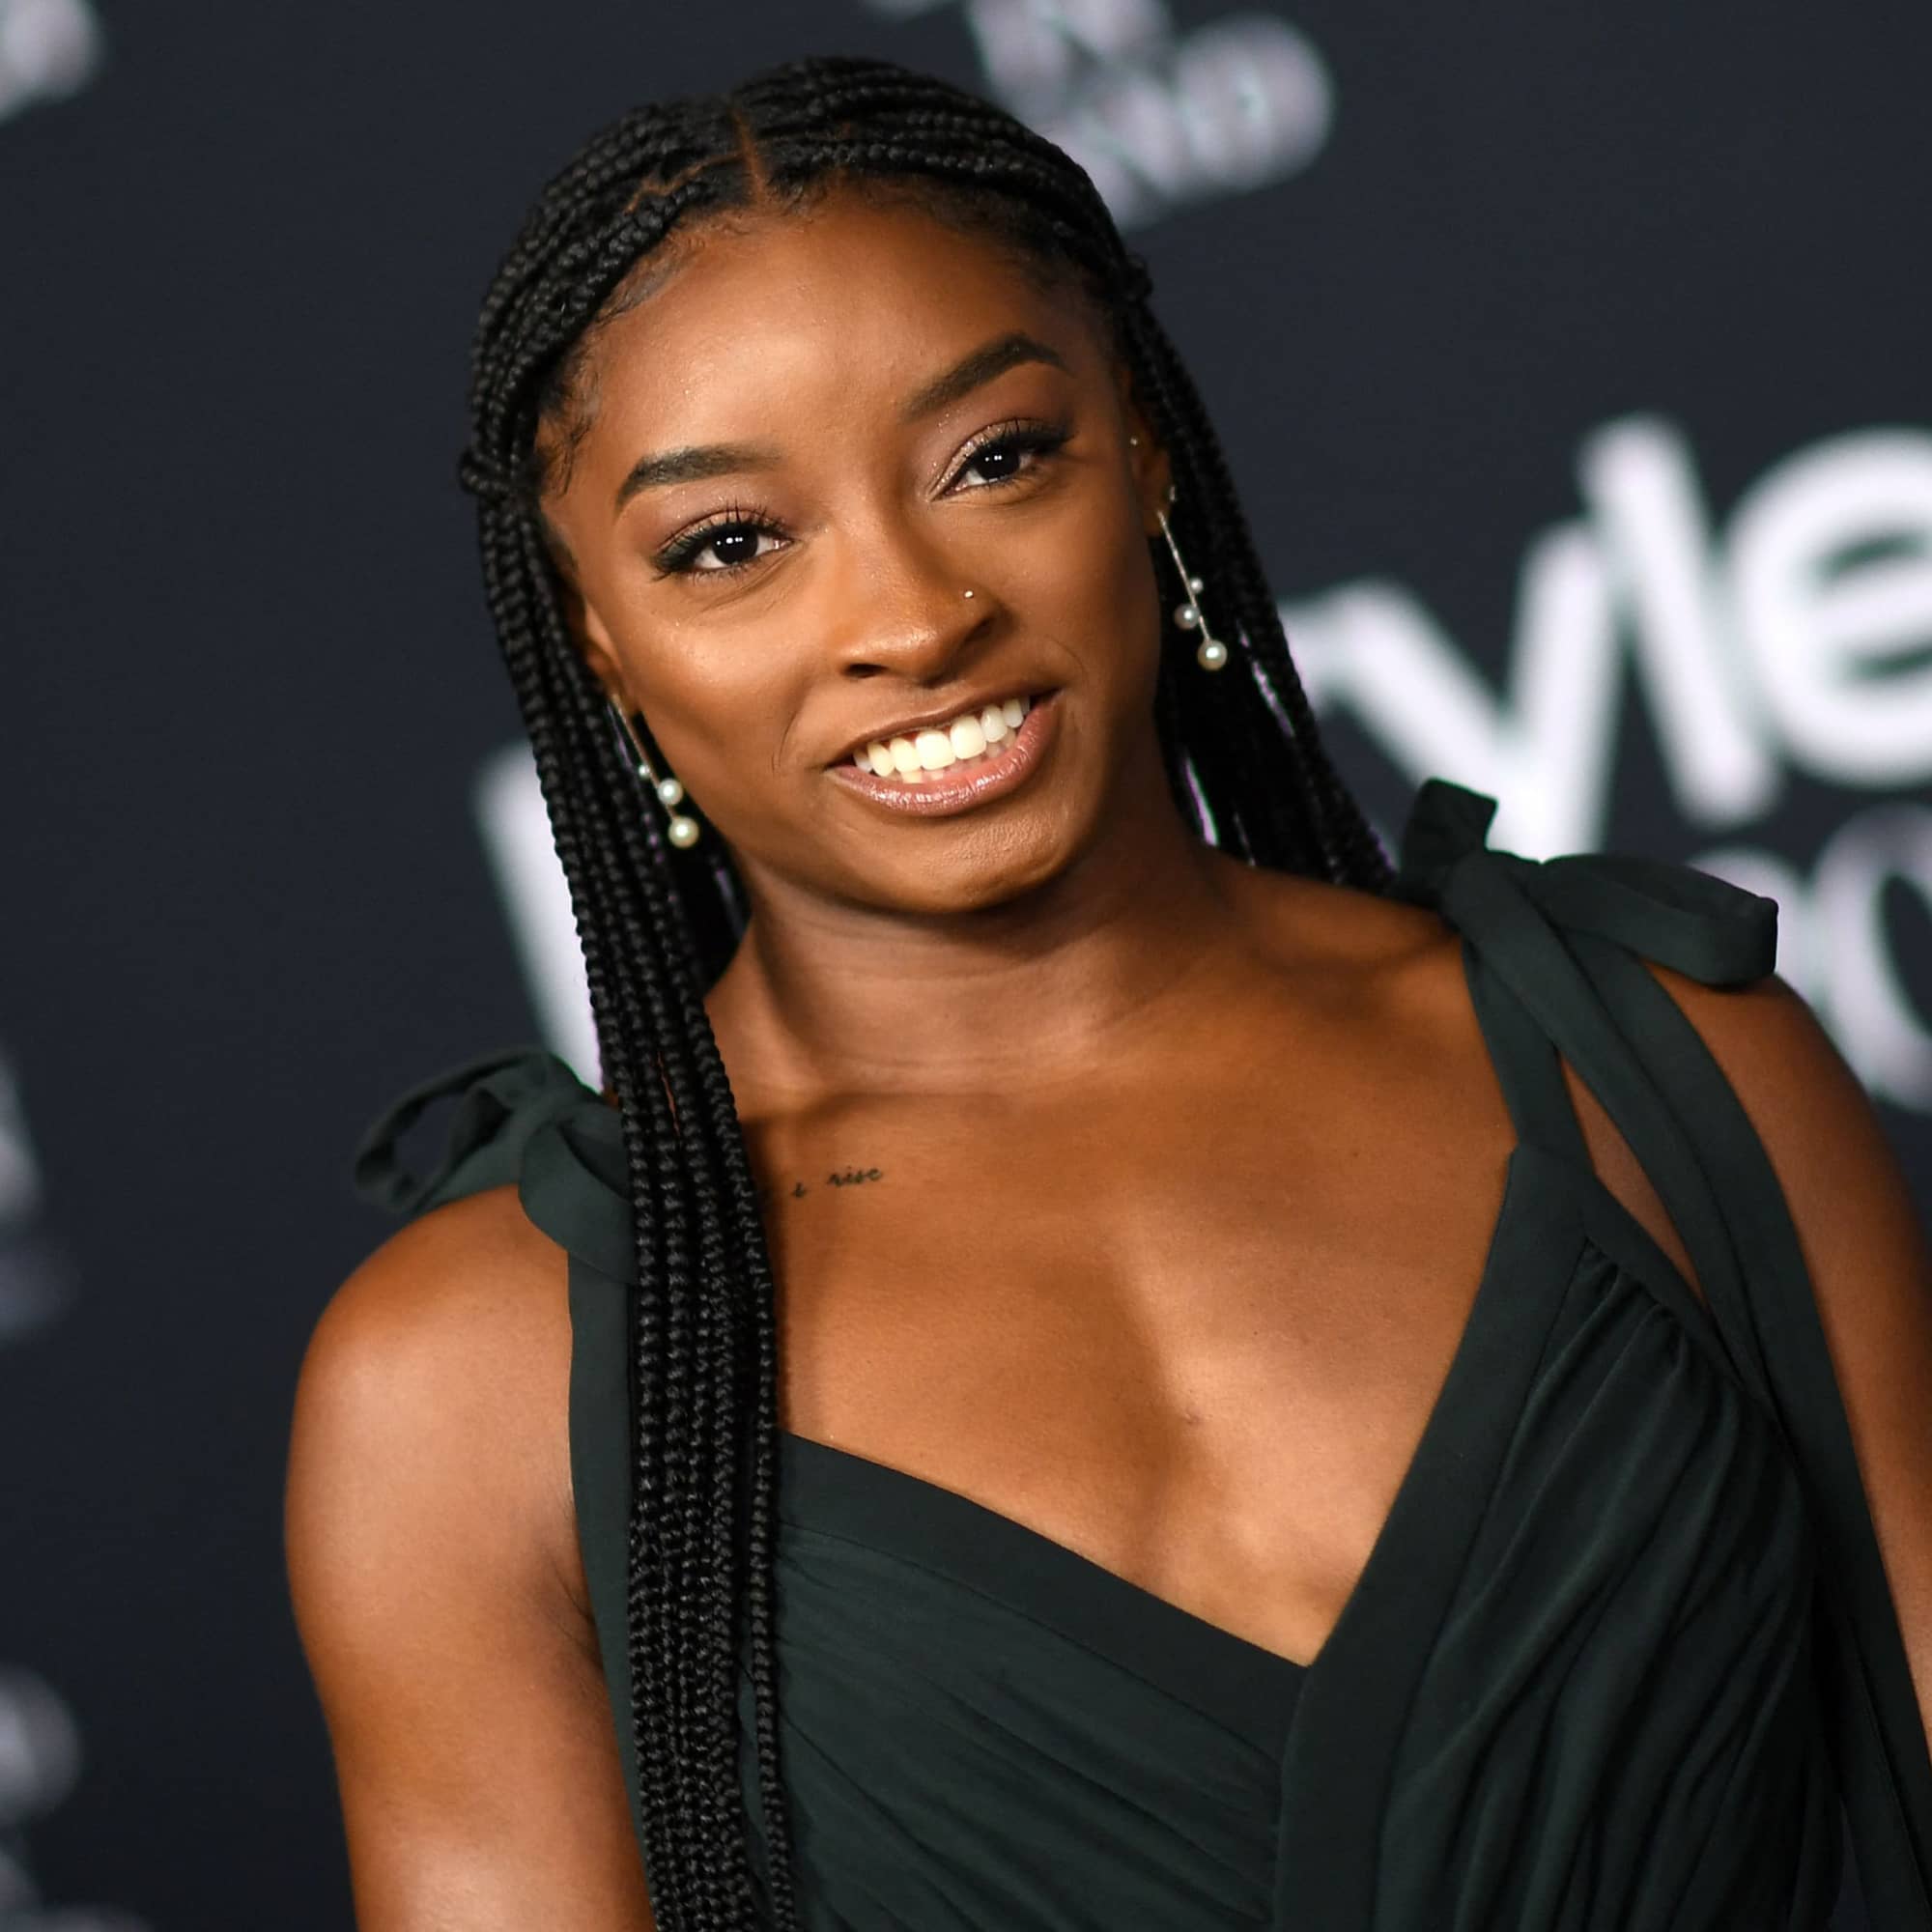 Simone Biles Celebrates Her Birthday in a Backless Halter Dress on the ...